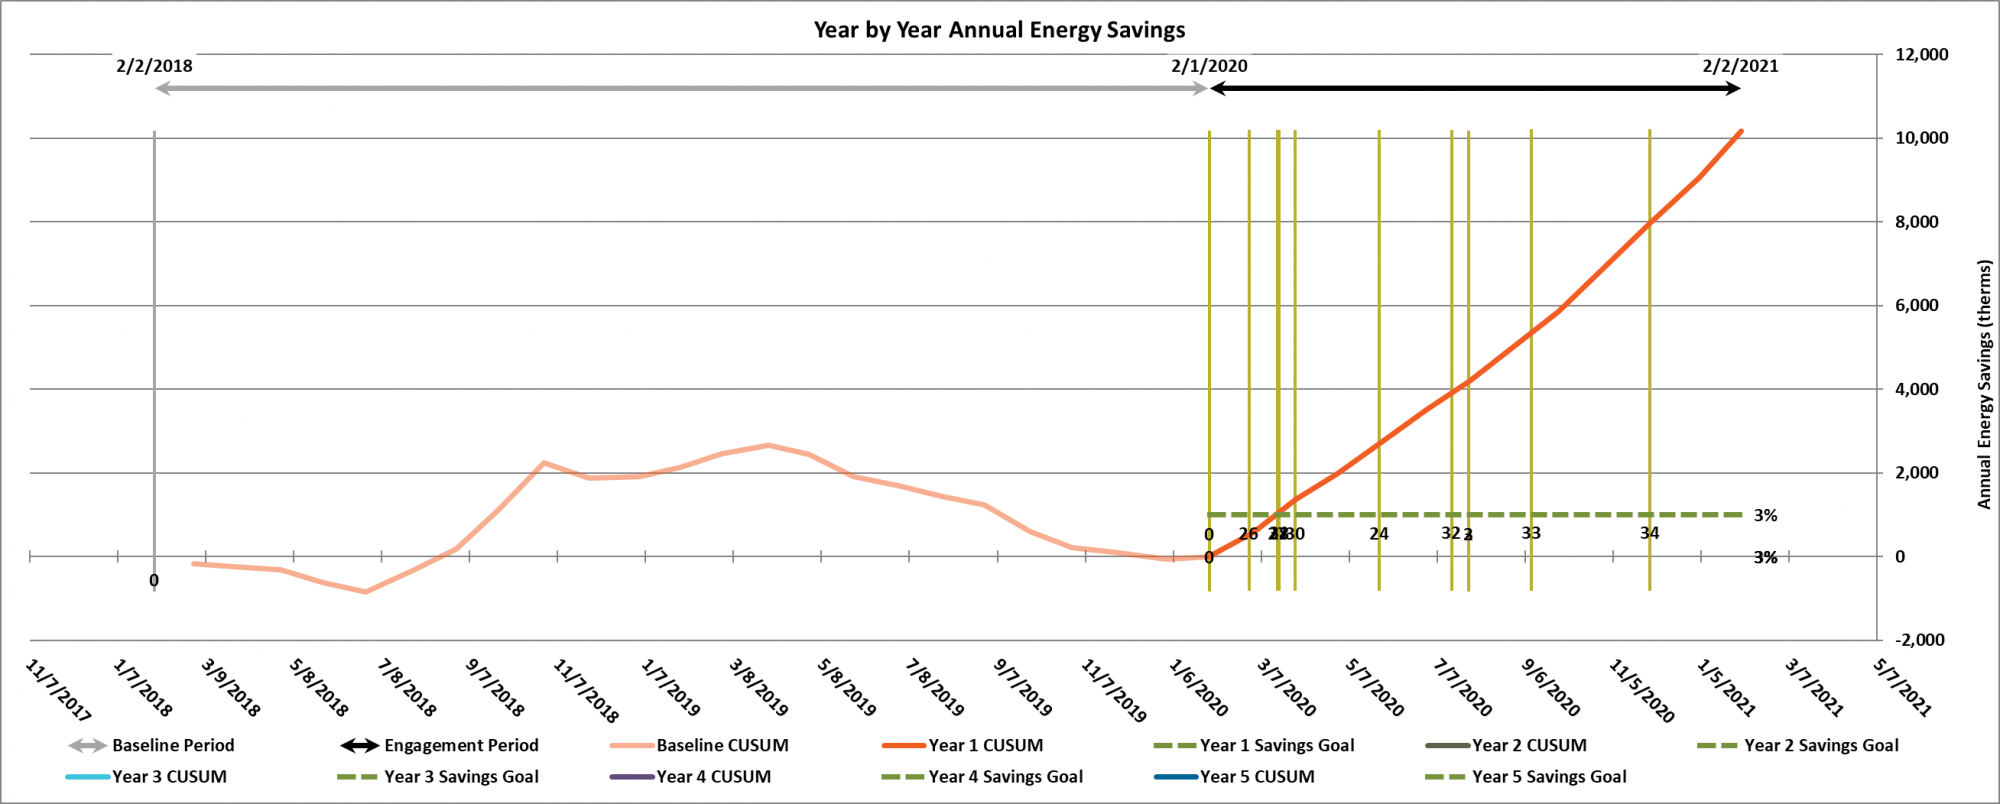 Line graph showing annual energy savings year by year for Pacific University